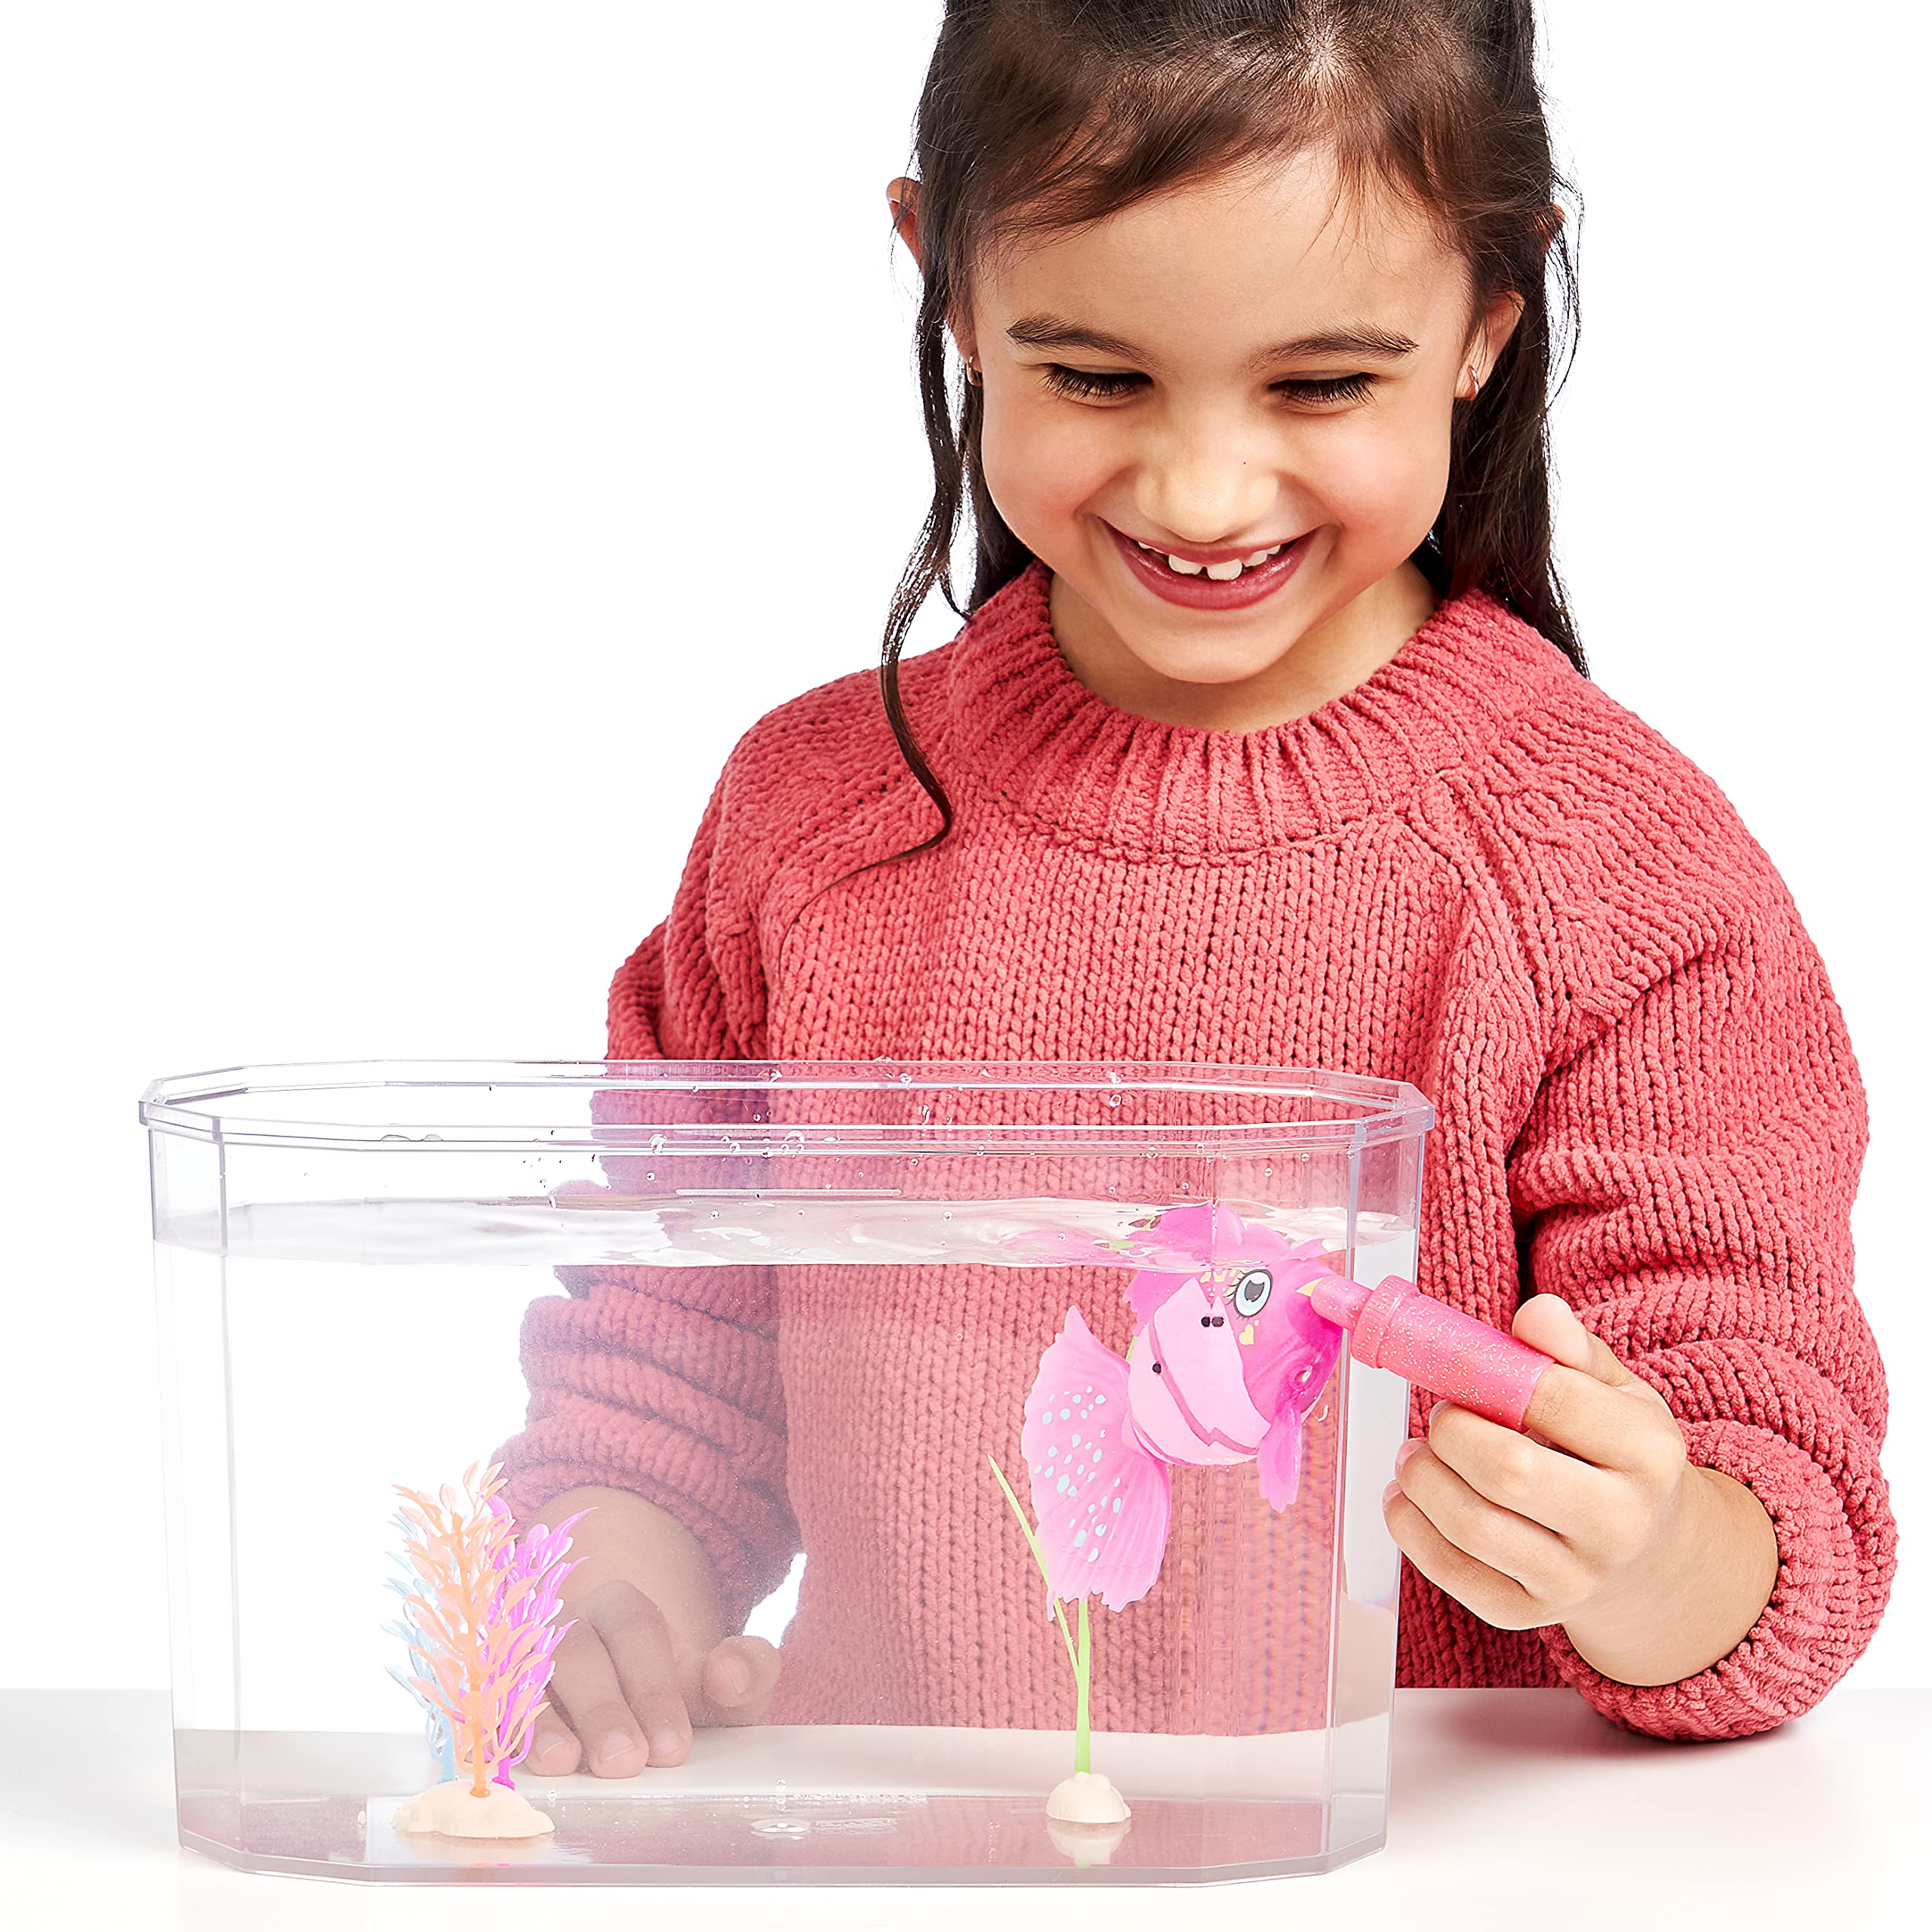 Little Live Pets - Lil' Dippers Fish Tank: Splasherina| Interactive Toy Fish & Tank, Magically Comes Alive in Water, Feed and Swims Like A Real Fish